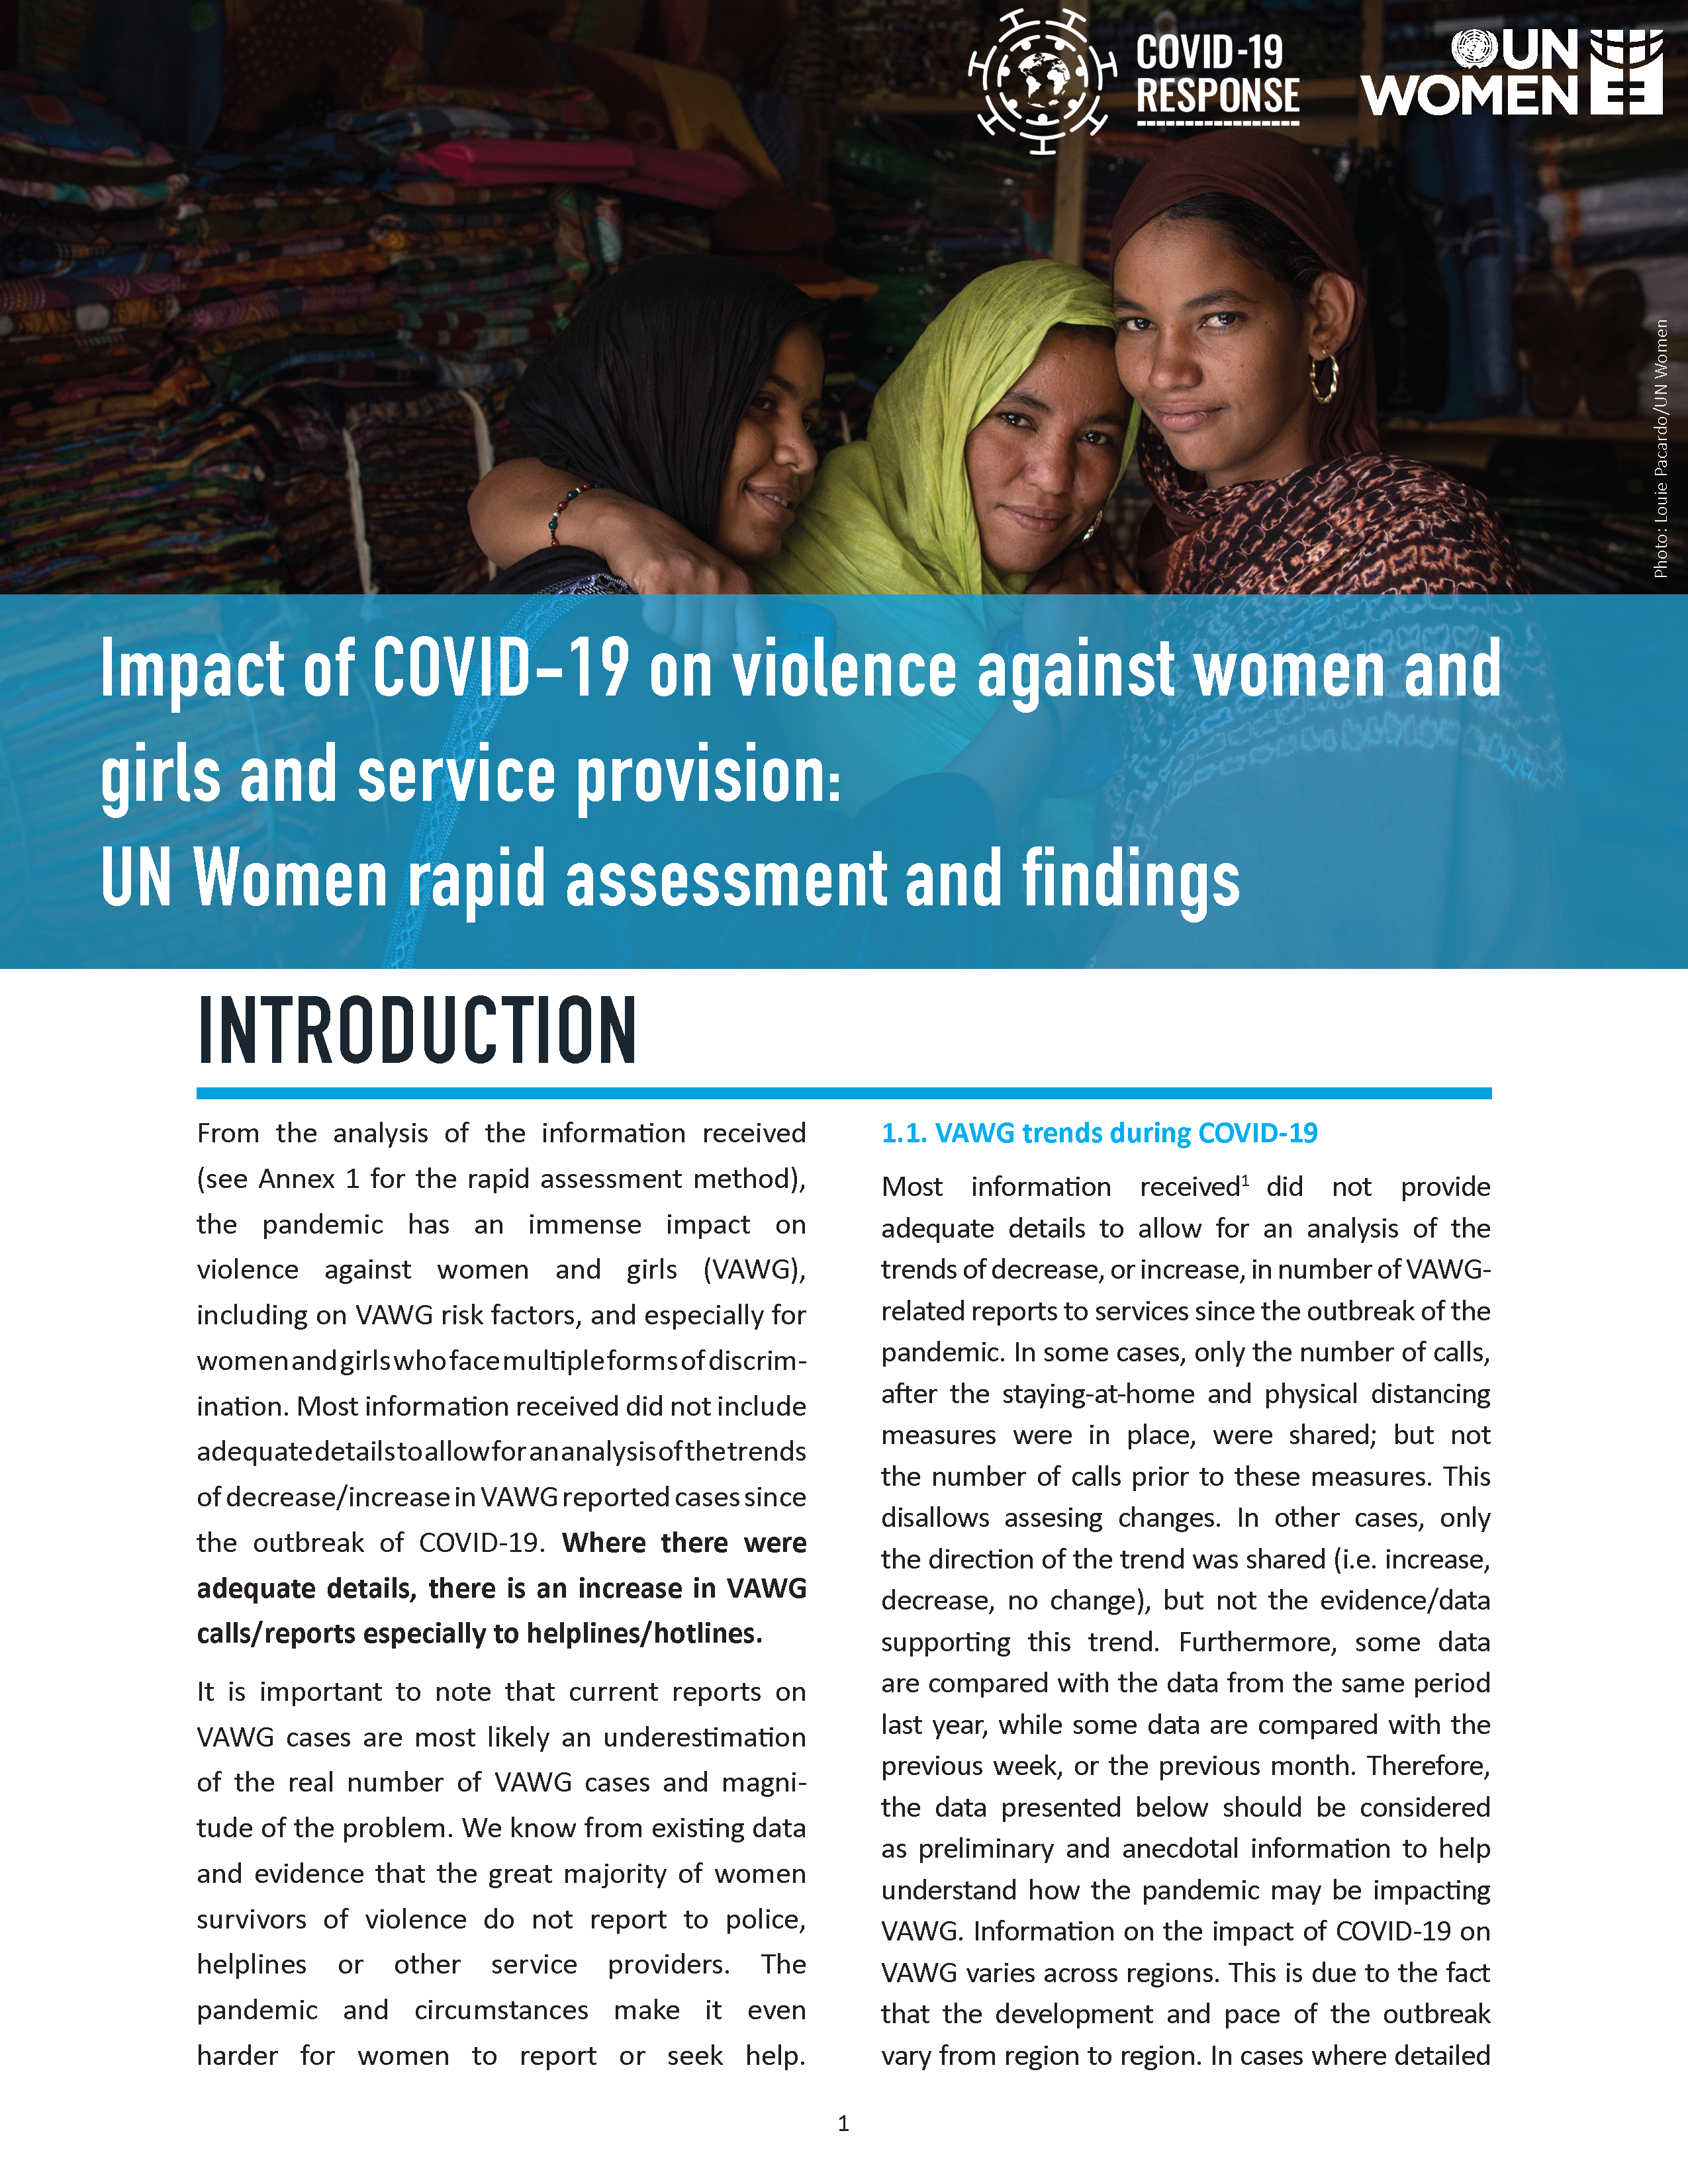 COVID19 and VAW services brief